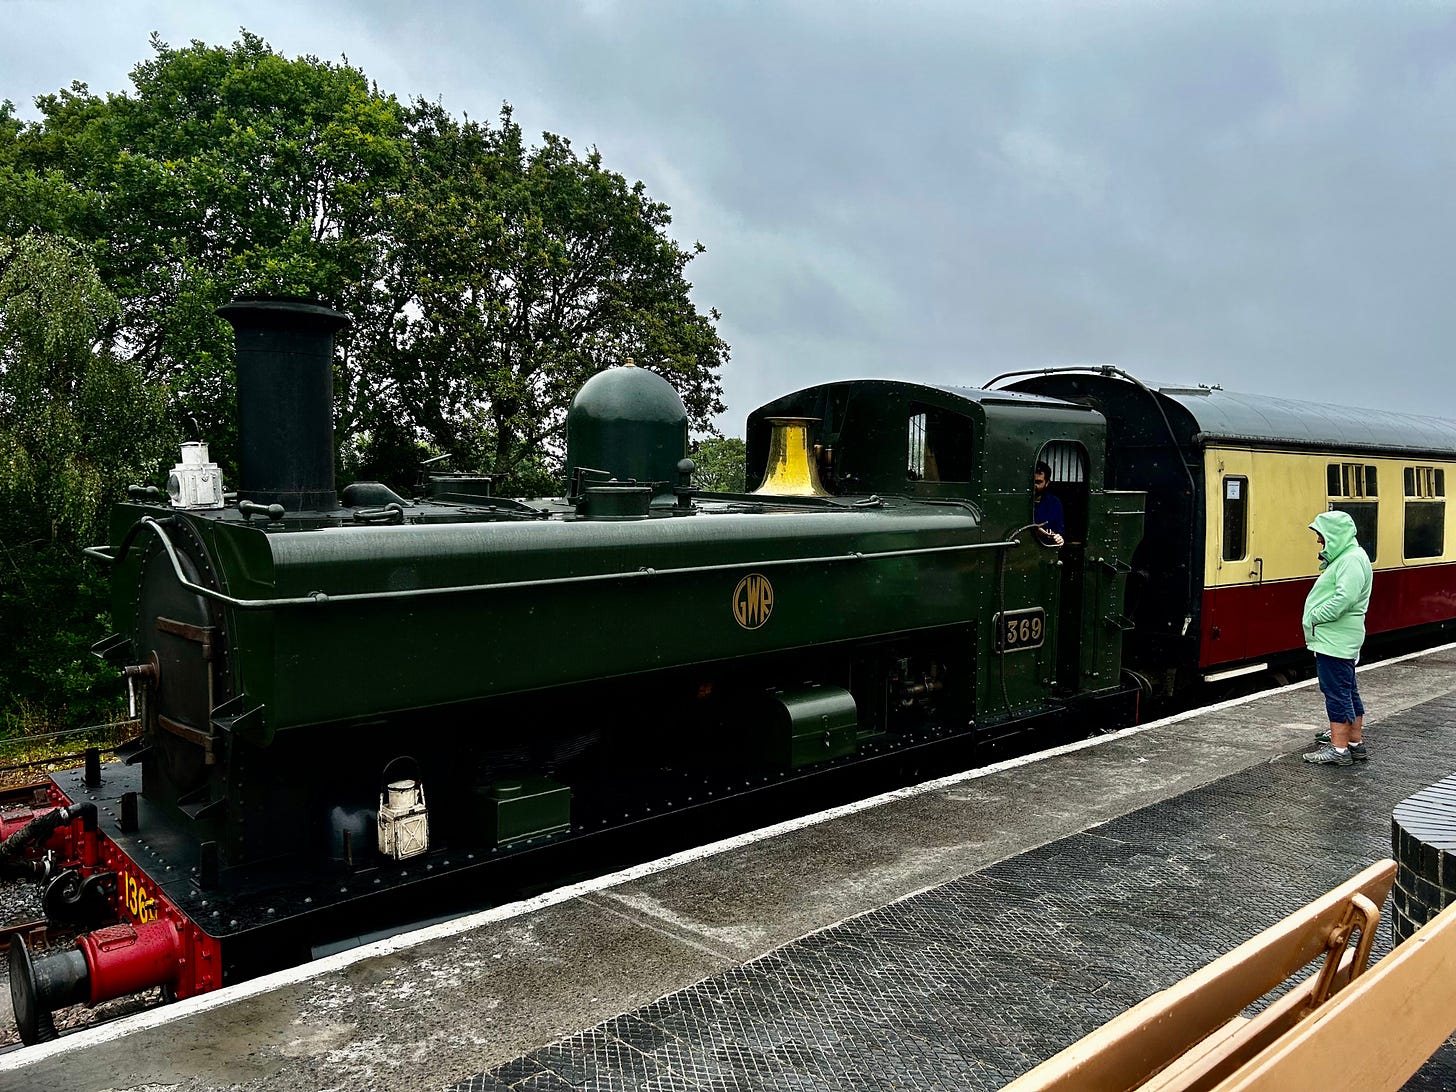 The GWR 0-6-0PT stands ready to leave Totnes Riverside Station. Her dark green paintwork dampened in the dismal weather. South Devon Railway runs several steam trains. Image: Roland's Travels